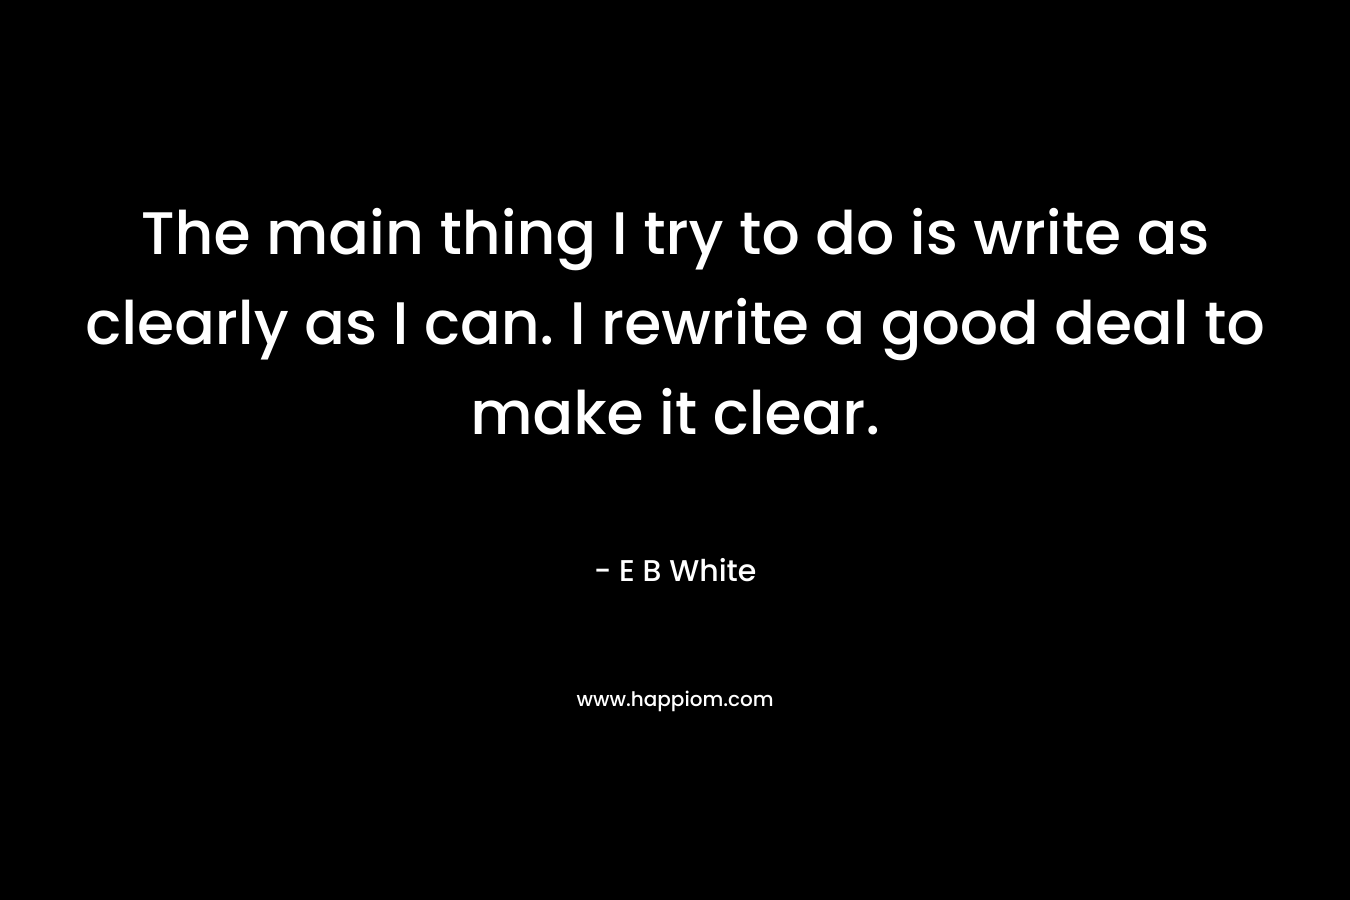 The main thing I try to do is write as clearly as I can. I rewrite a good deal to make it clear. – E B White